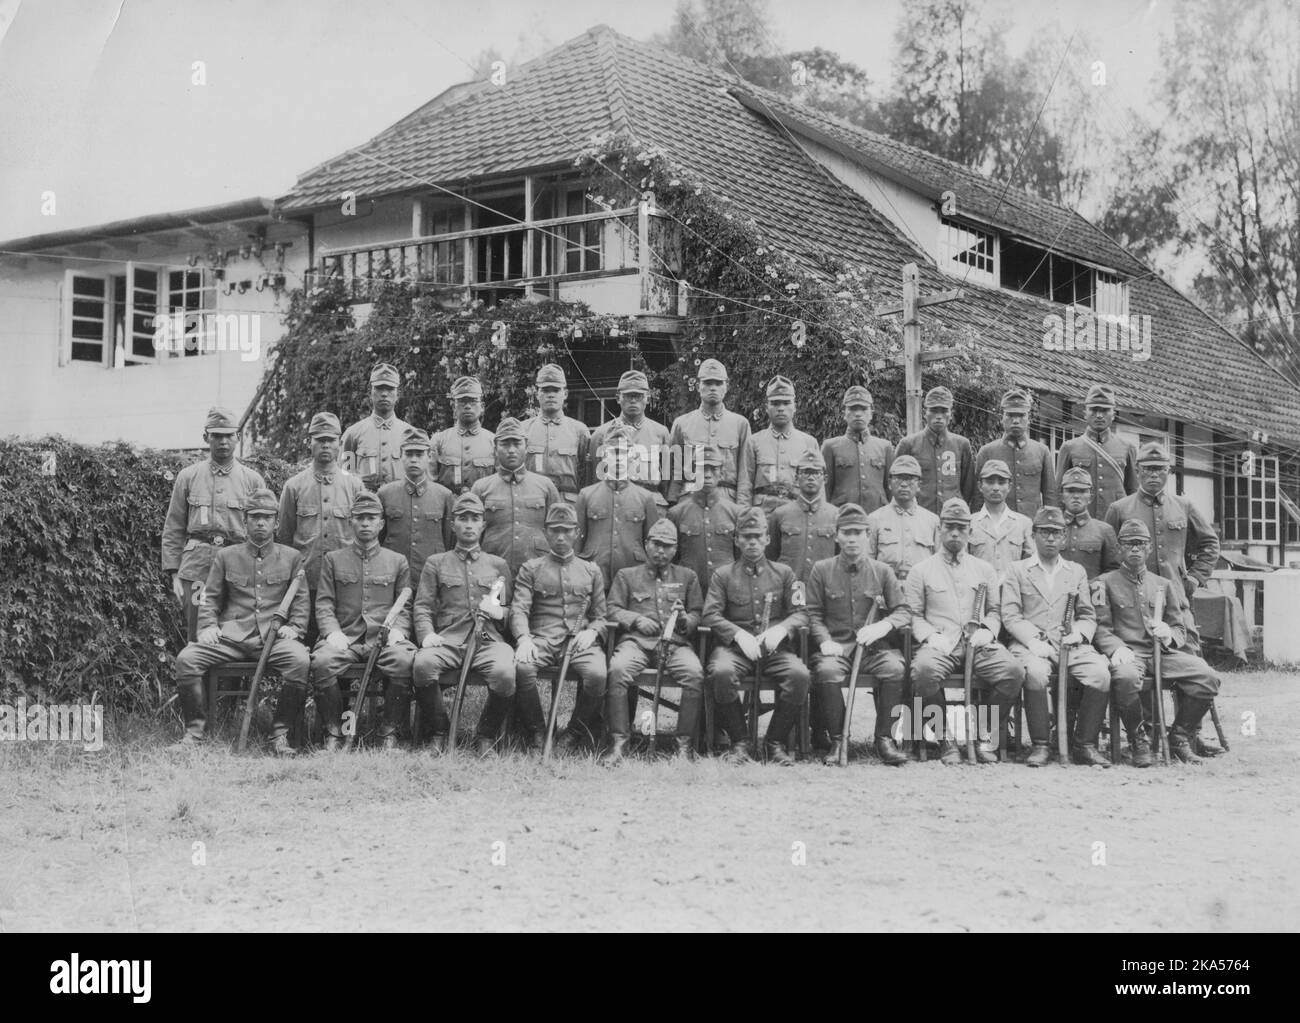 Pacific War, 1941-1945. The cadre of the Imperial Japanese Army 230th Infantry Regiment photographed in Sumatra, Dutch East Indies, 1942. Seated in the center of the front row is the regiment's commander—Colonel Shoji. Raised in Shizuoka in the late 1930's, the 230th Infantry Regiment saw its first action in China. With the outbreak of the Pacific War in December of 1941 the regiment participated in the Battle of Hong Kong, followed by the invasion the Dutch East Indies, and later the Guadalcanal Campaign where they would sustain heavy casualties before withdrawing from the island. Stock Photo